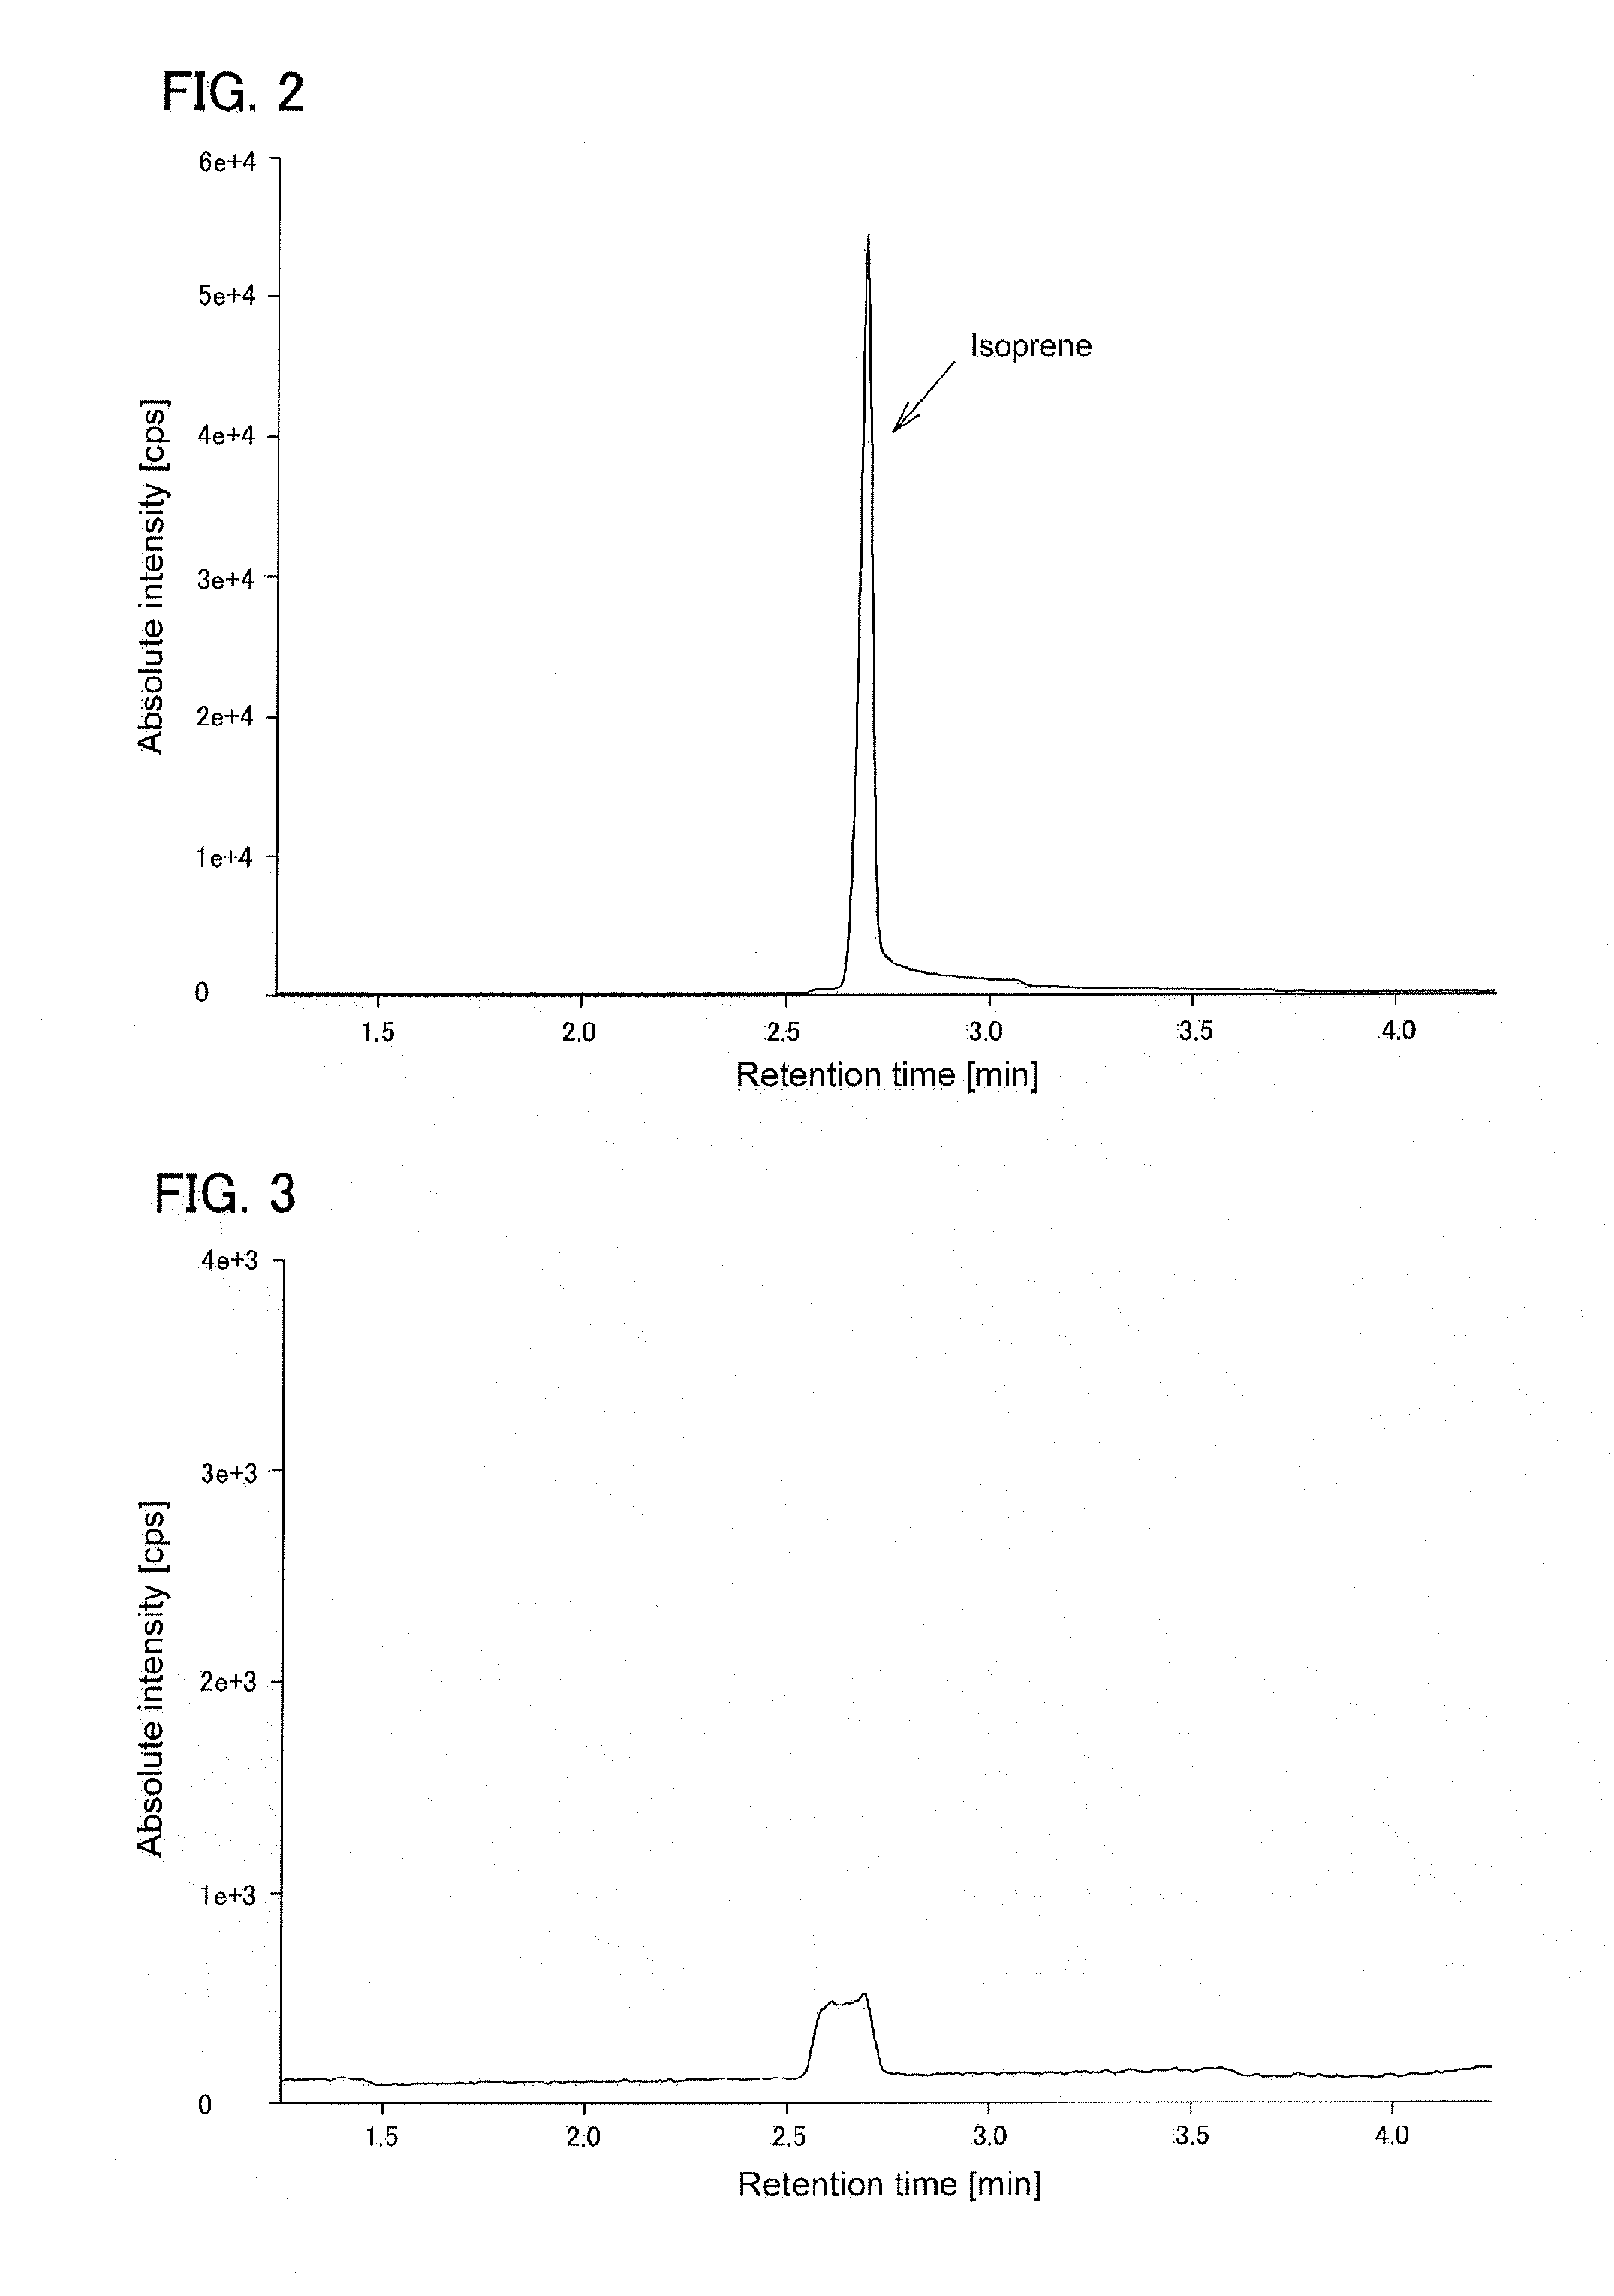 Recombinant cell, and method for producing isoprene